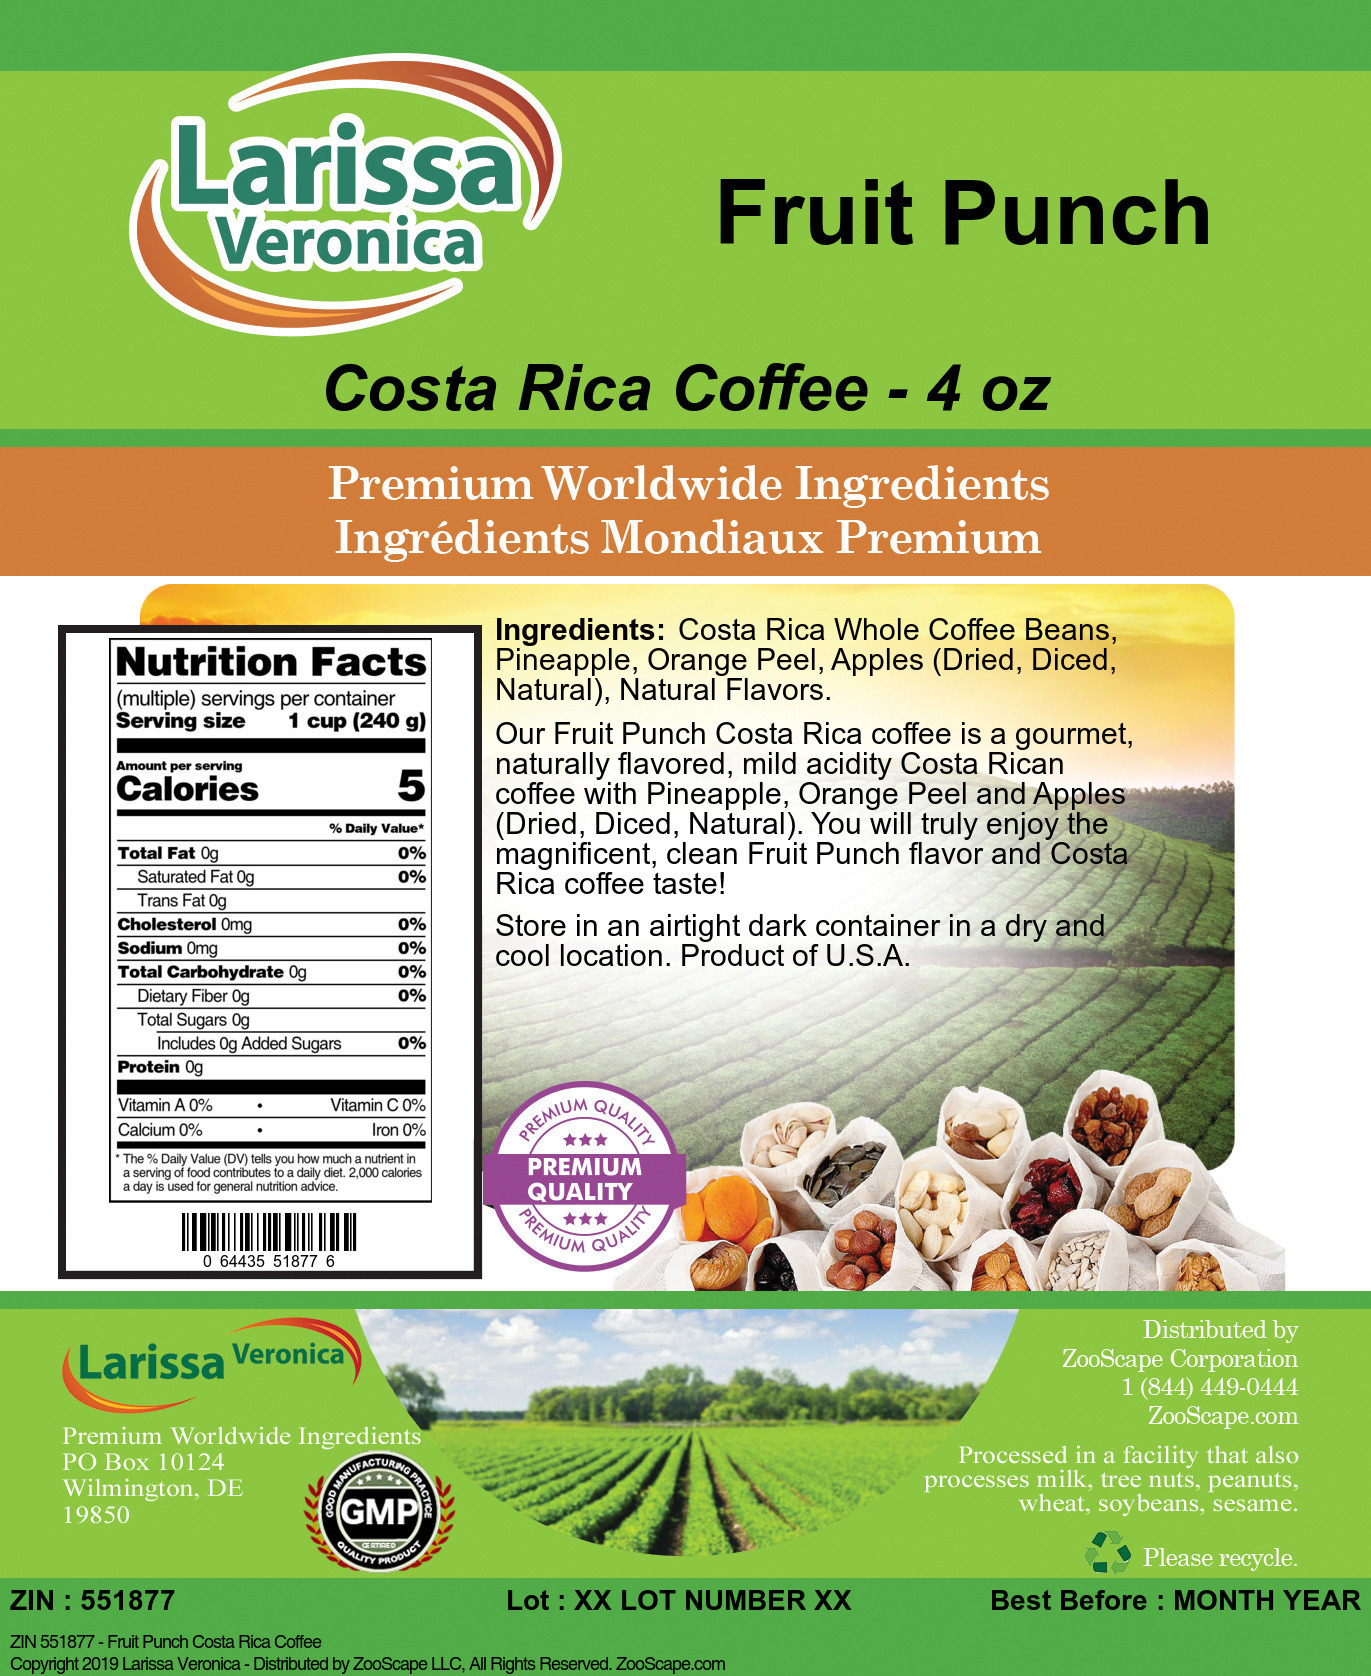 Fruit Punch Costa Rica Coffee - Label